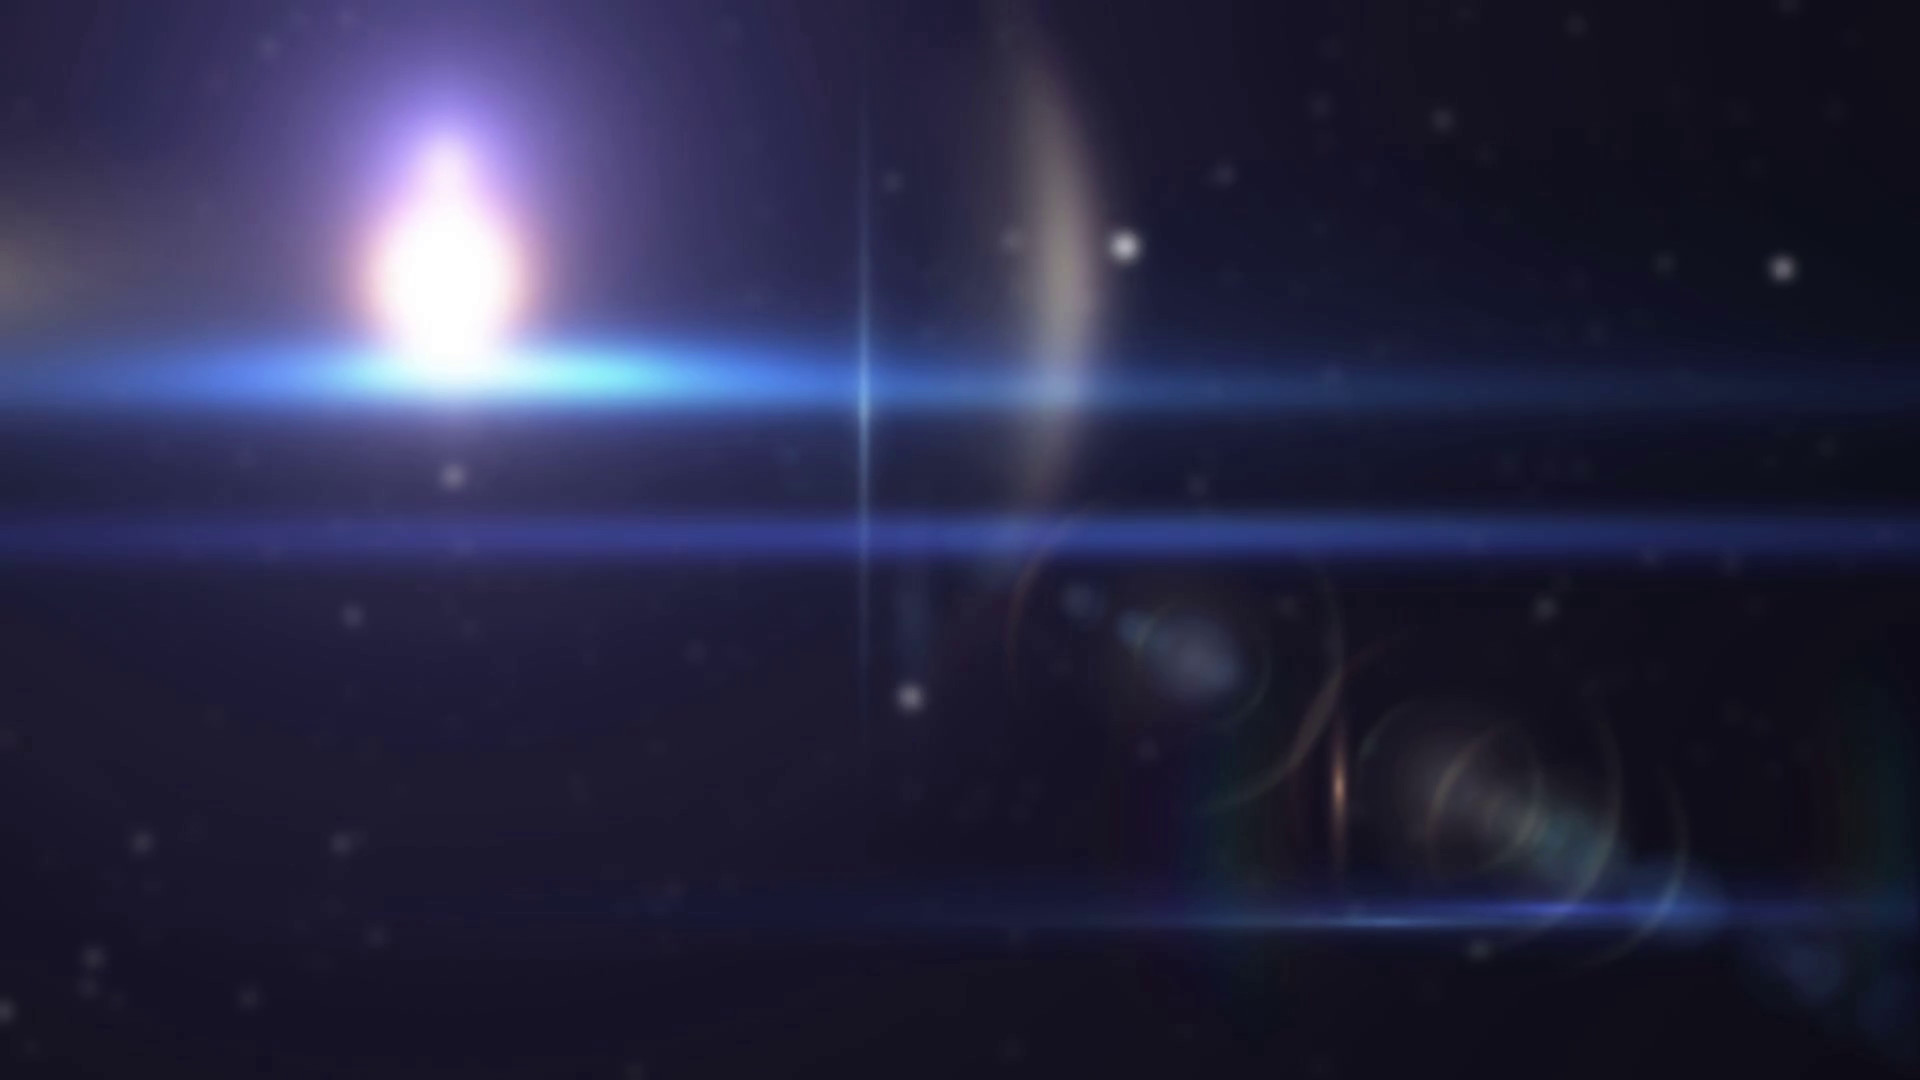 4k Abstract Blue Lens Flare Background With A Sci Fi Solar Science Tech Style Motion Background Storyblocks Video 1920x1080